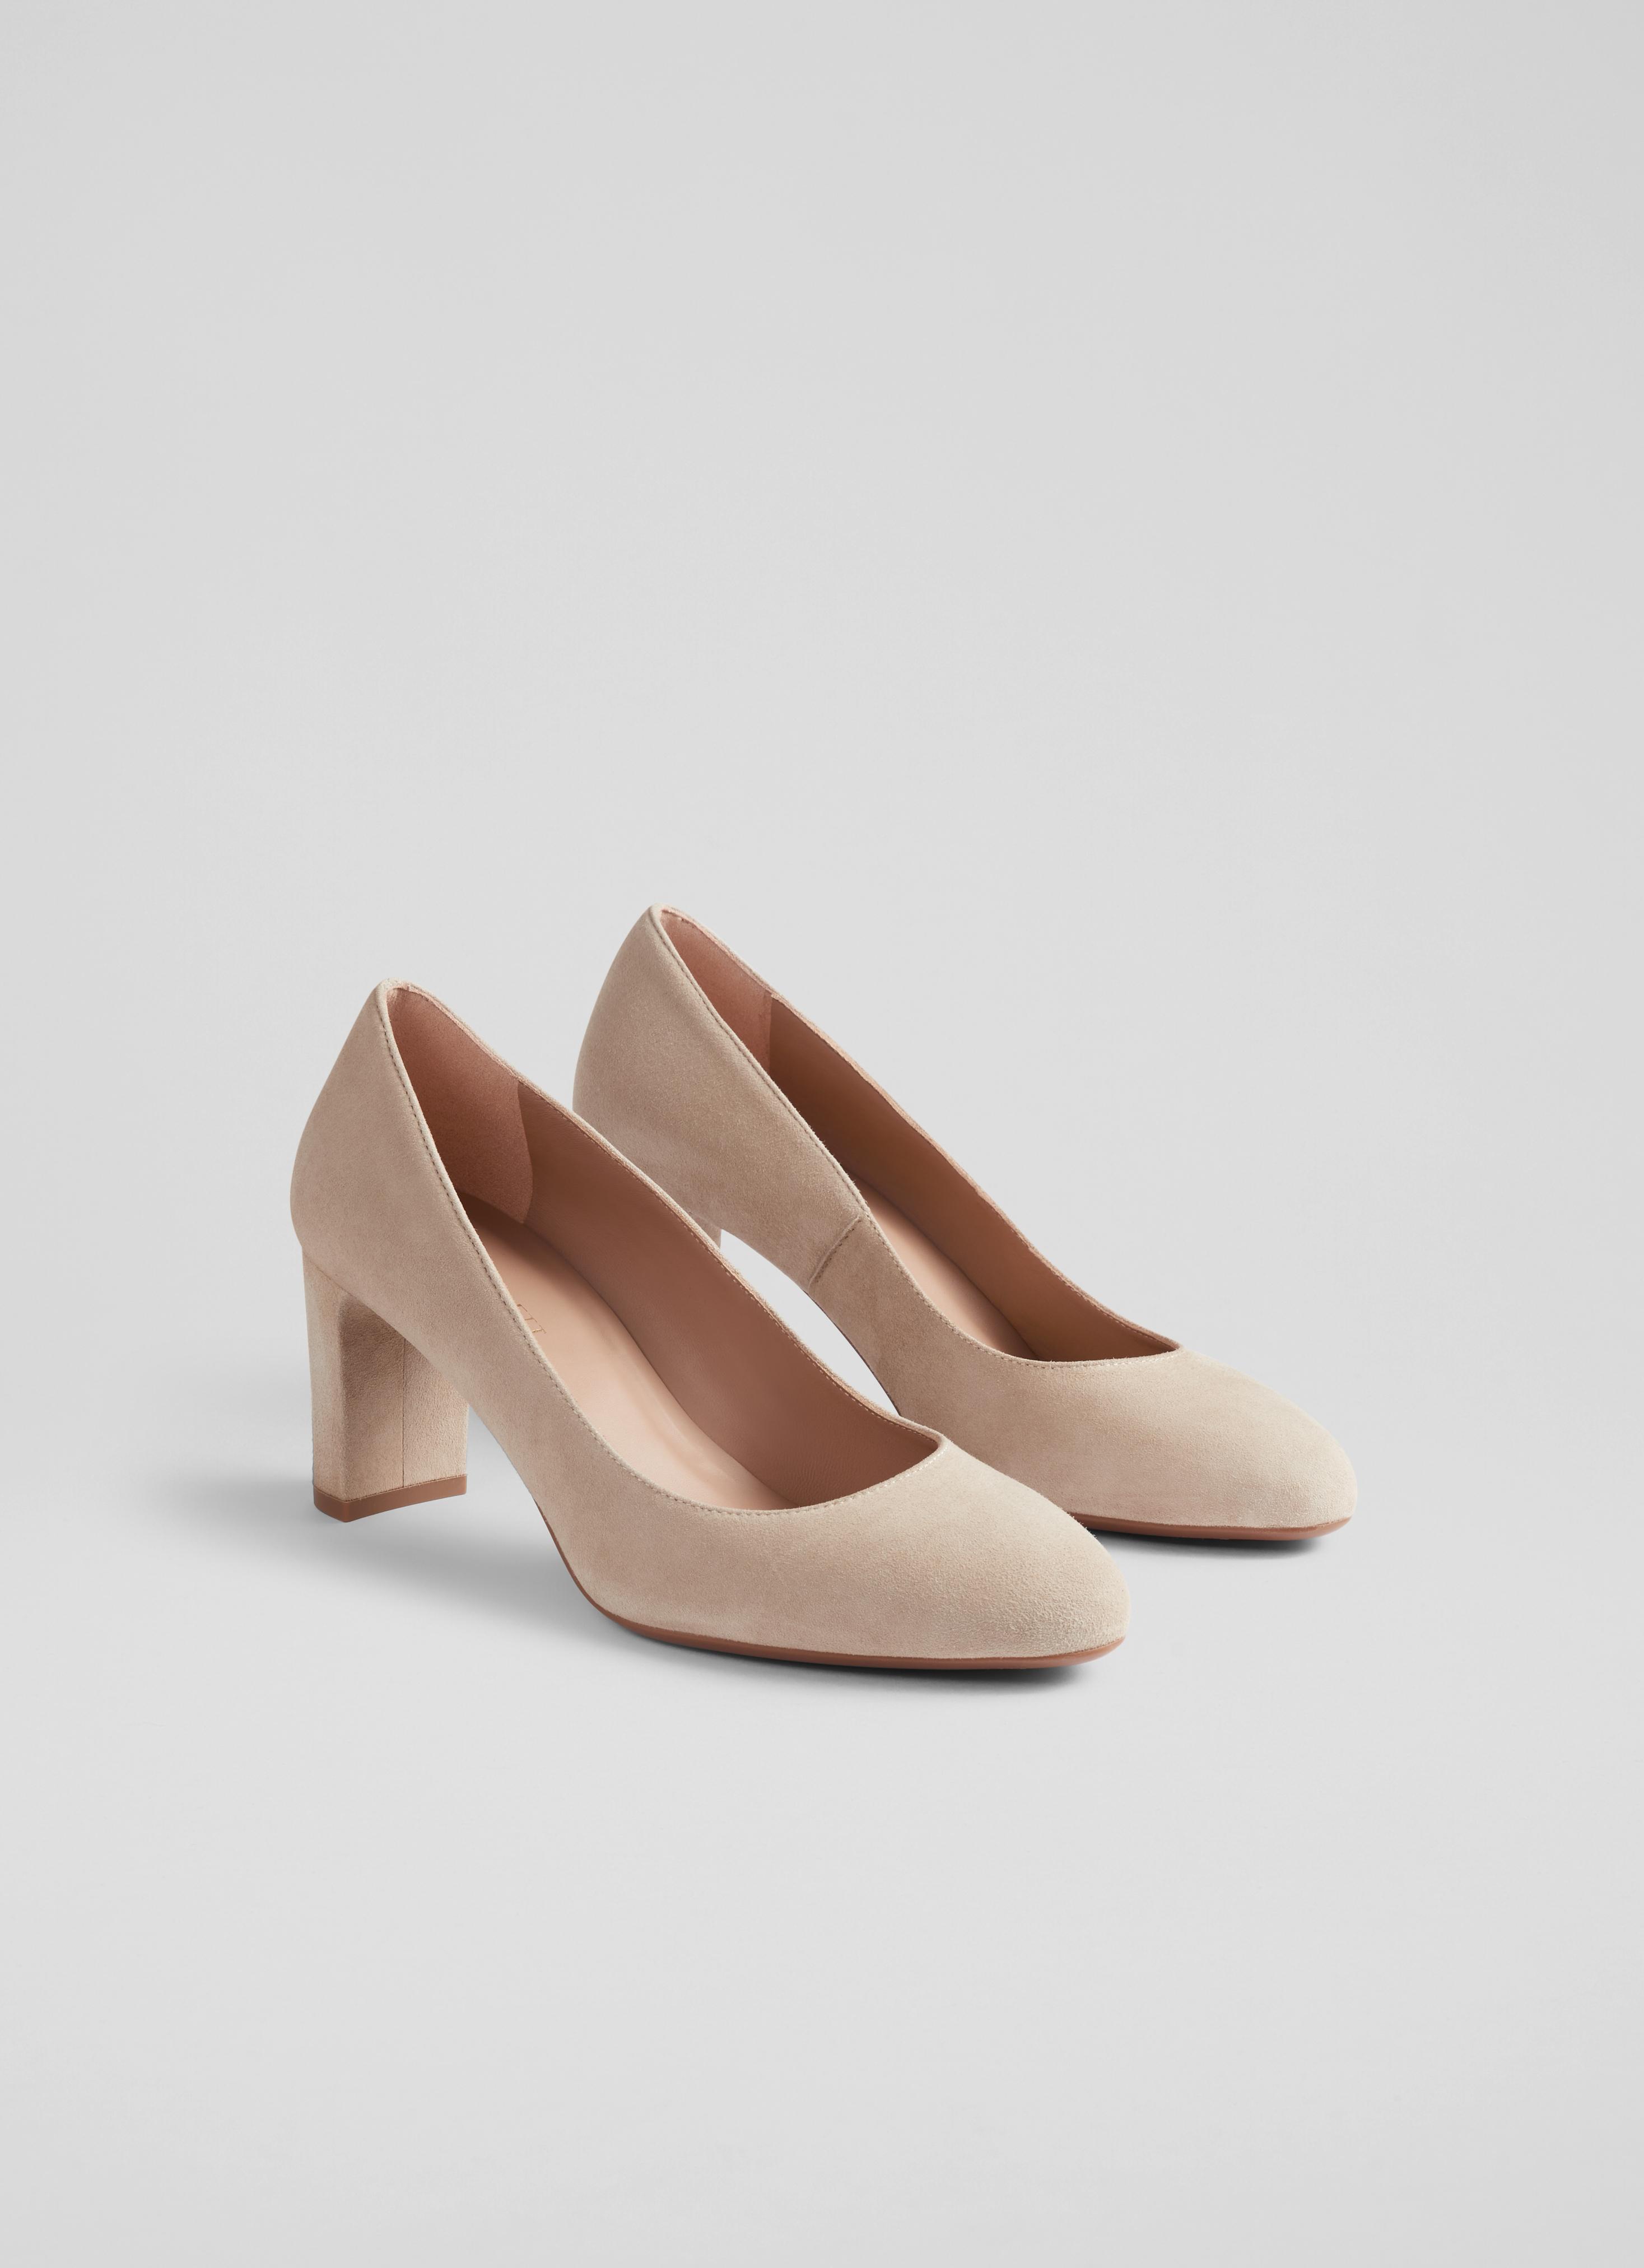 Truffle Collection pointed platform high heel shoes in cream | ASOS